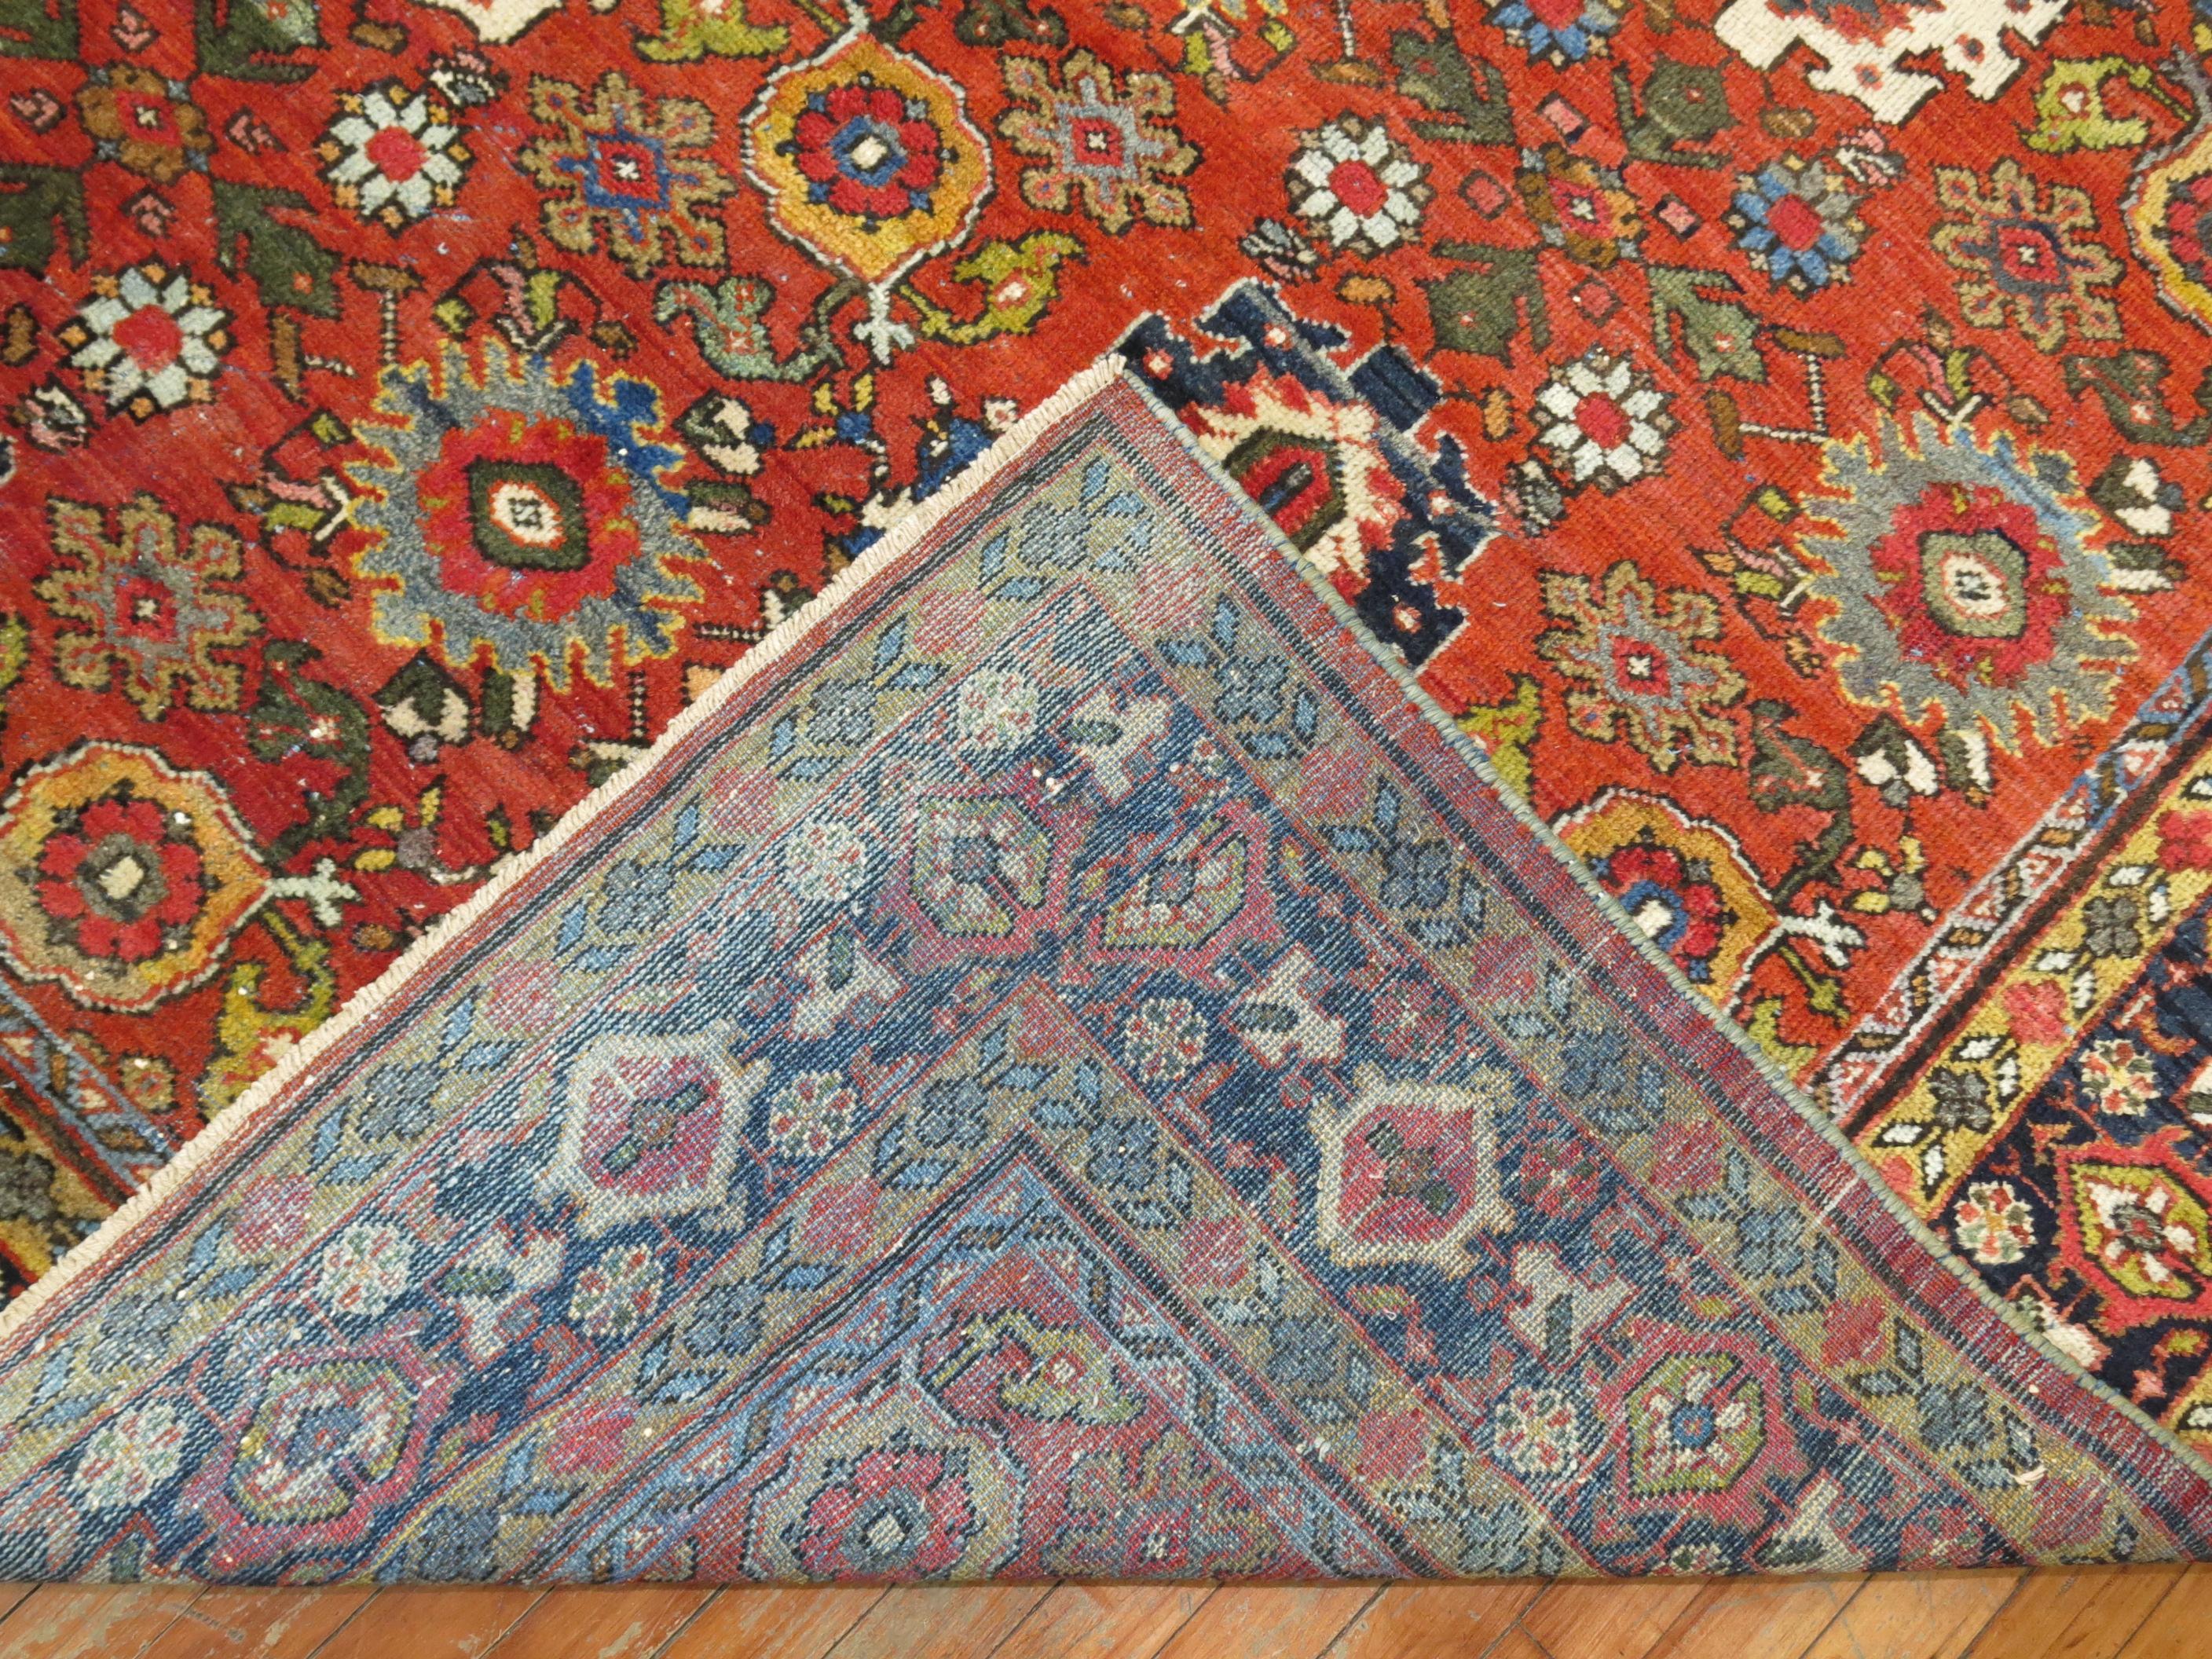 Room size Persian Mahal rug with an all-over motif

Mahal Persian carpets from the 19th century and turn of the 20th century have become one of the most desirable among Persian village weaving's, as they appeal strongly to both connoisseurs and